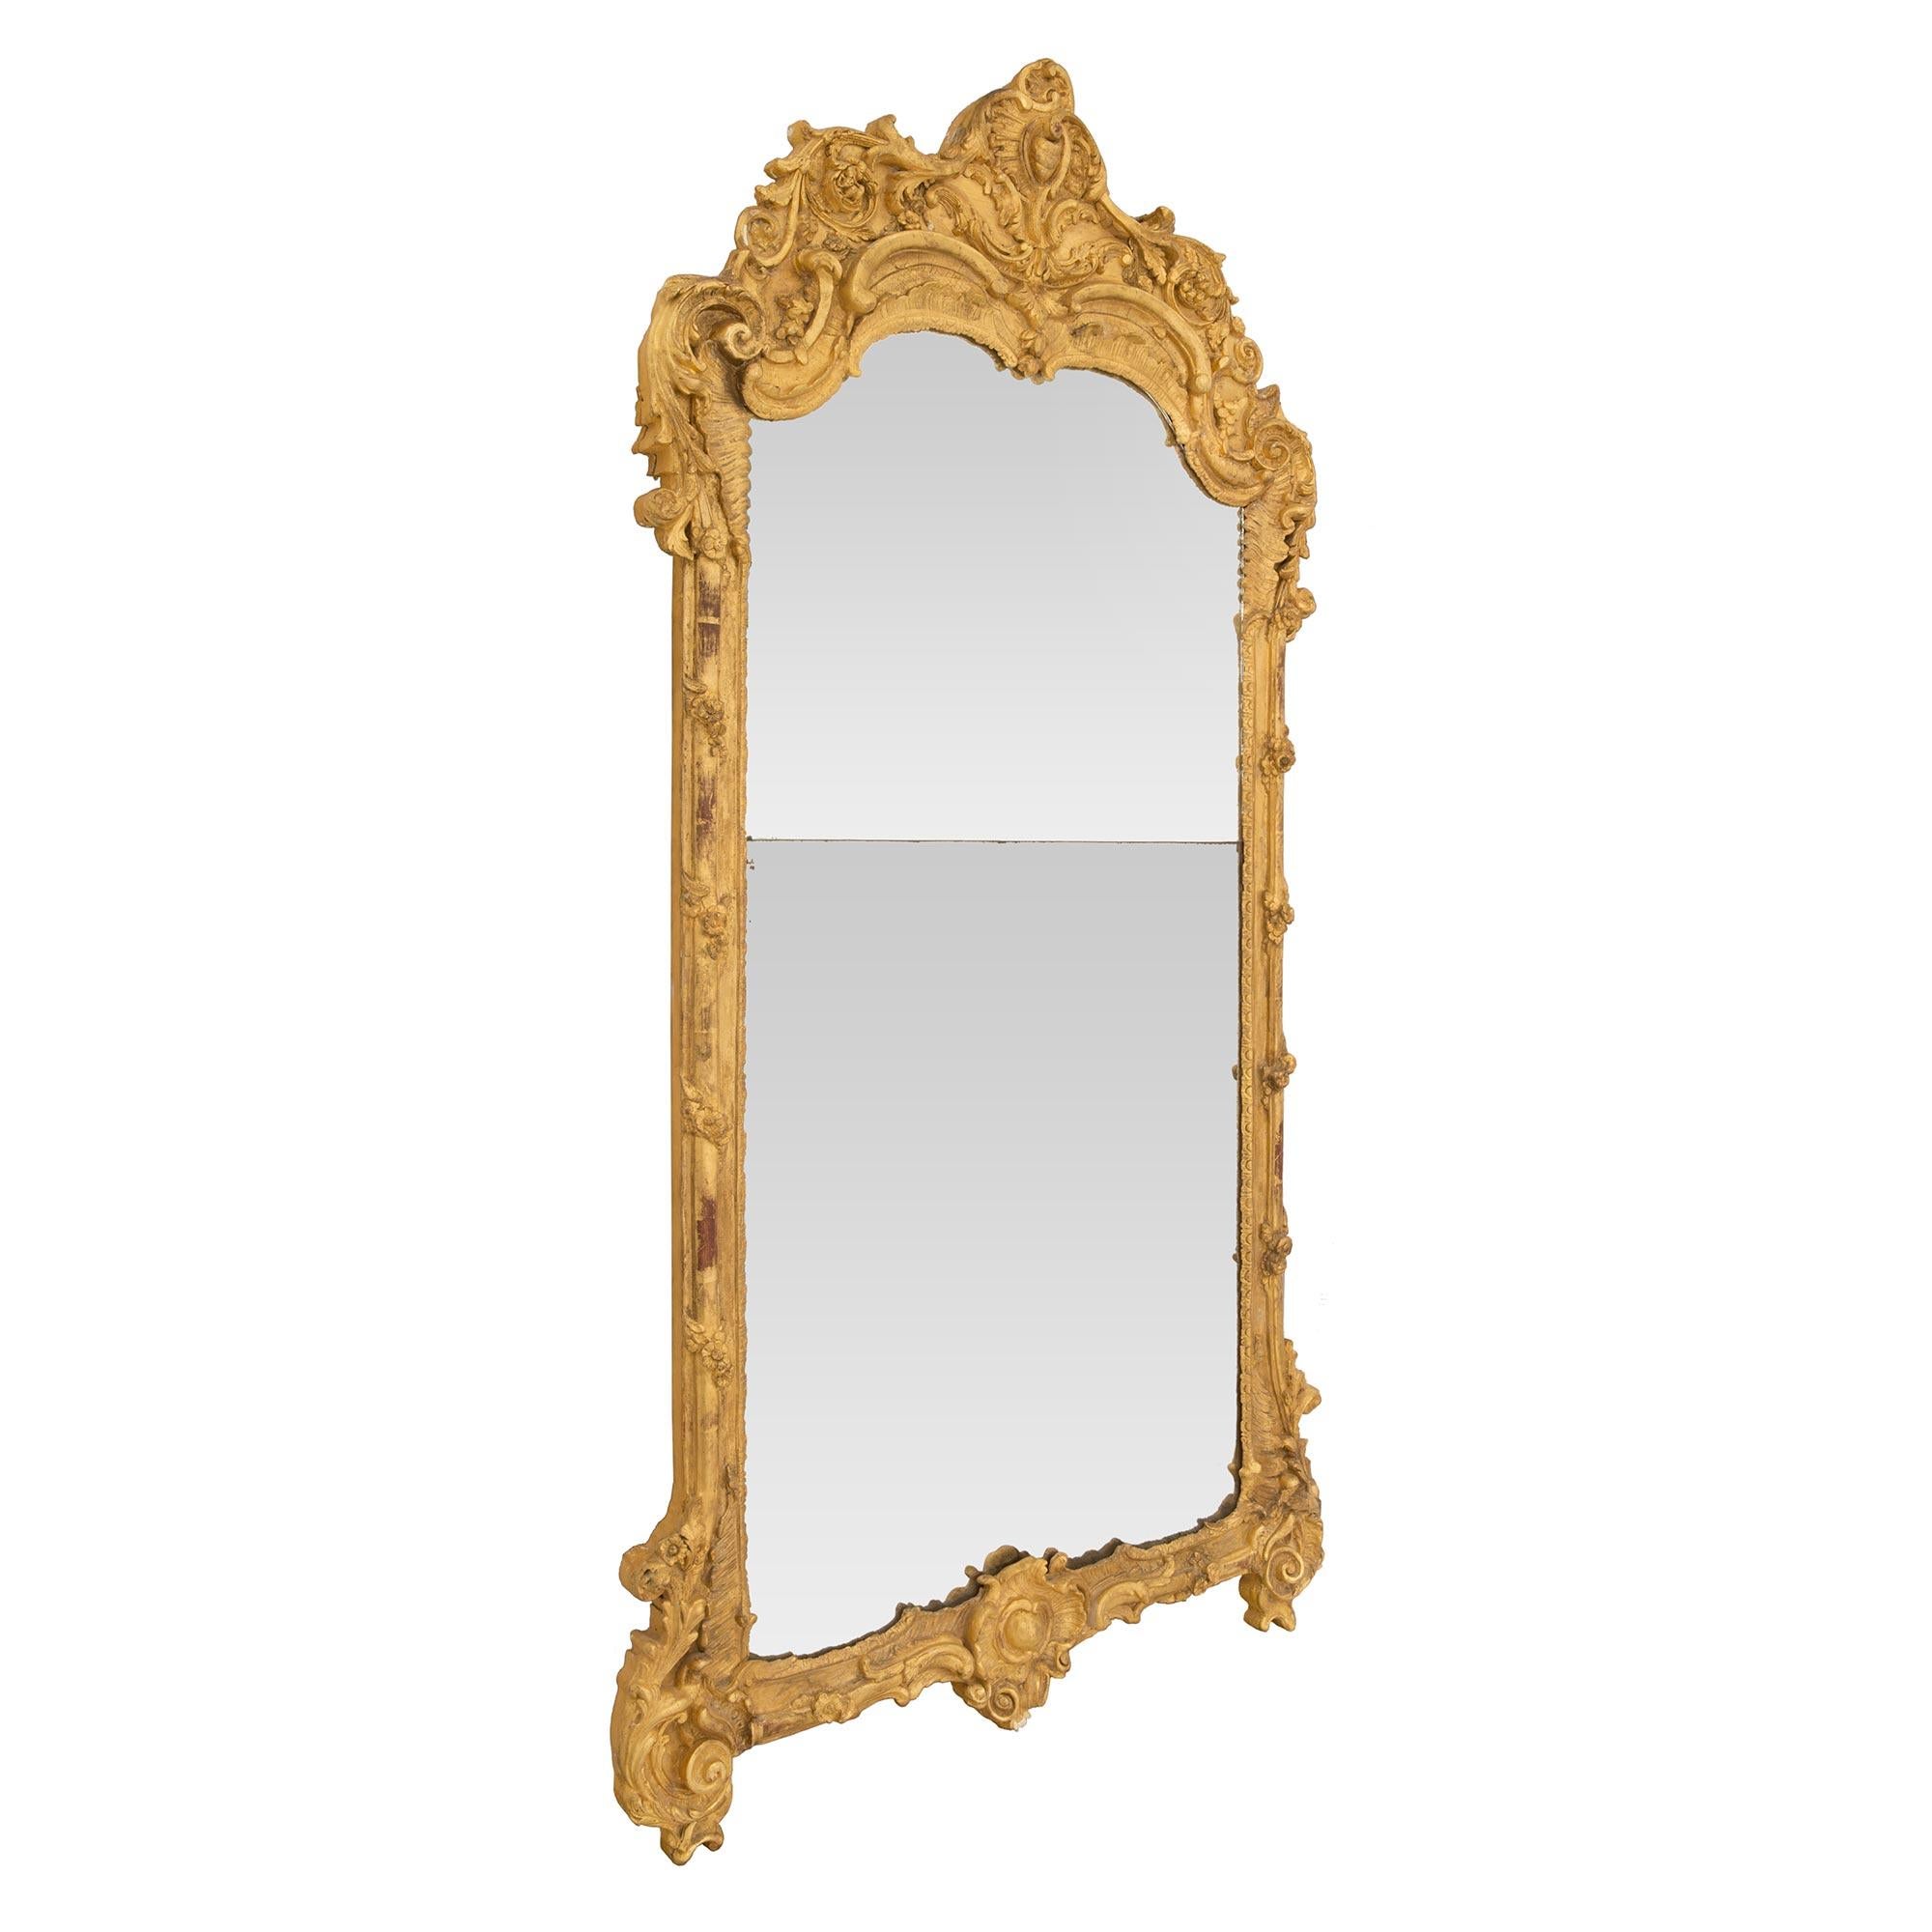 French 18th Century Regence Period Giltwood Mirror In Good Condition For Sale In West Palm Beach, FL